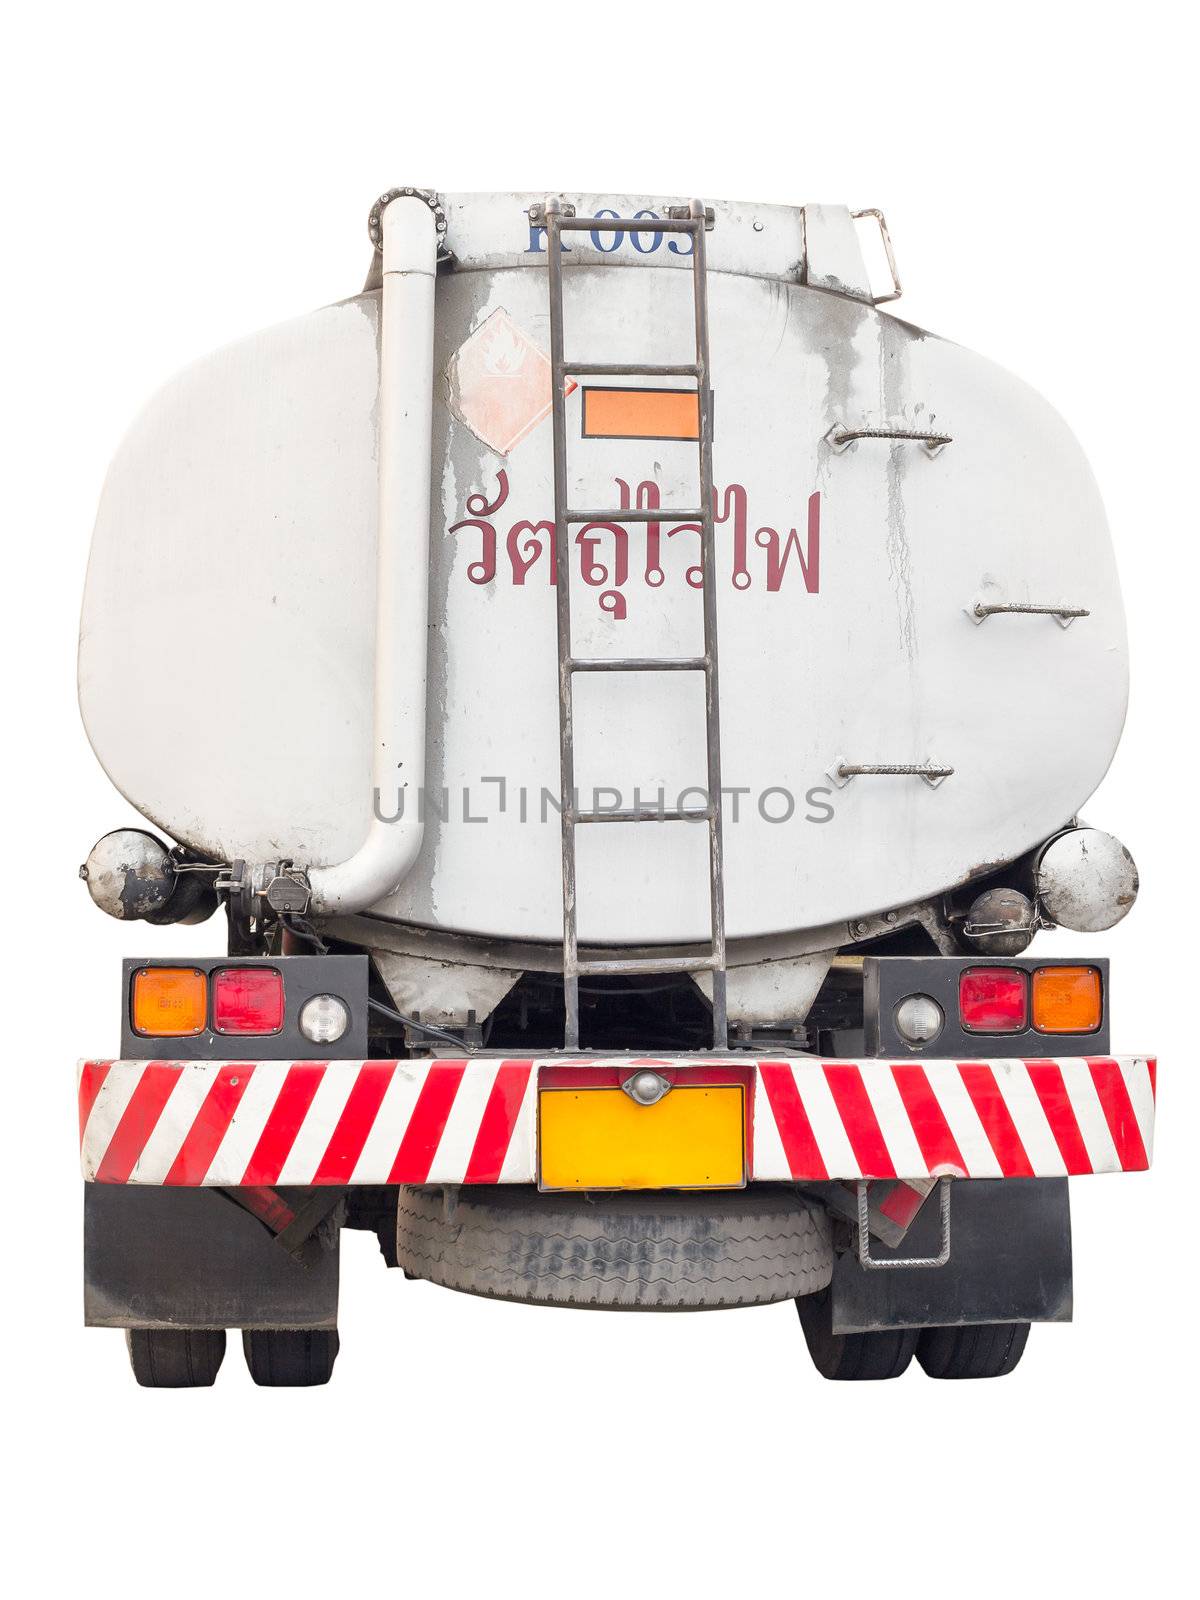 Oil truck with cargo container